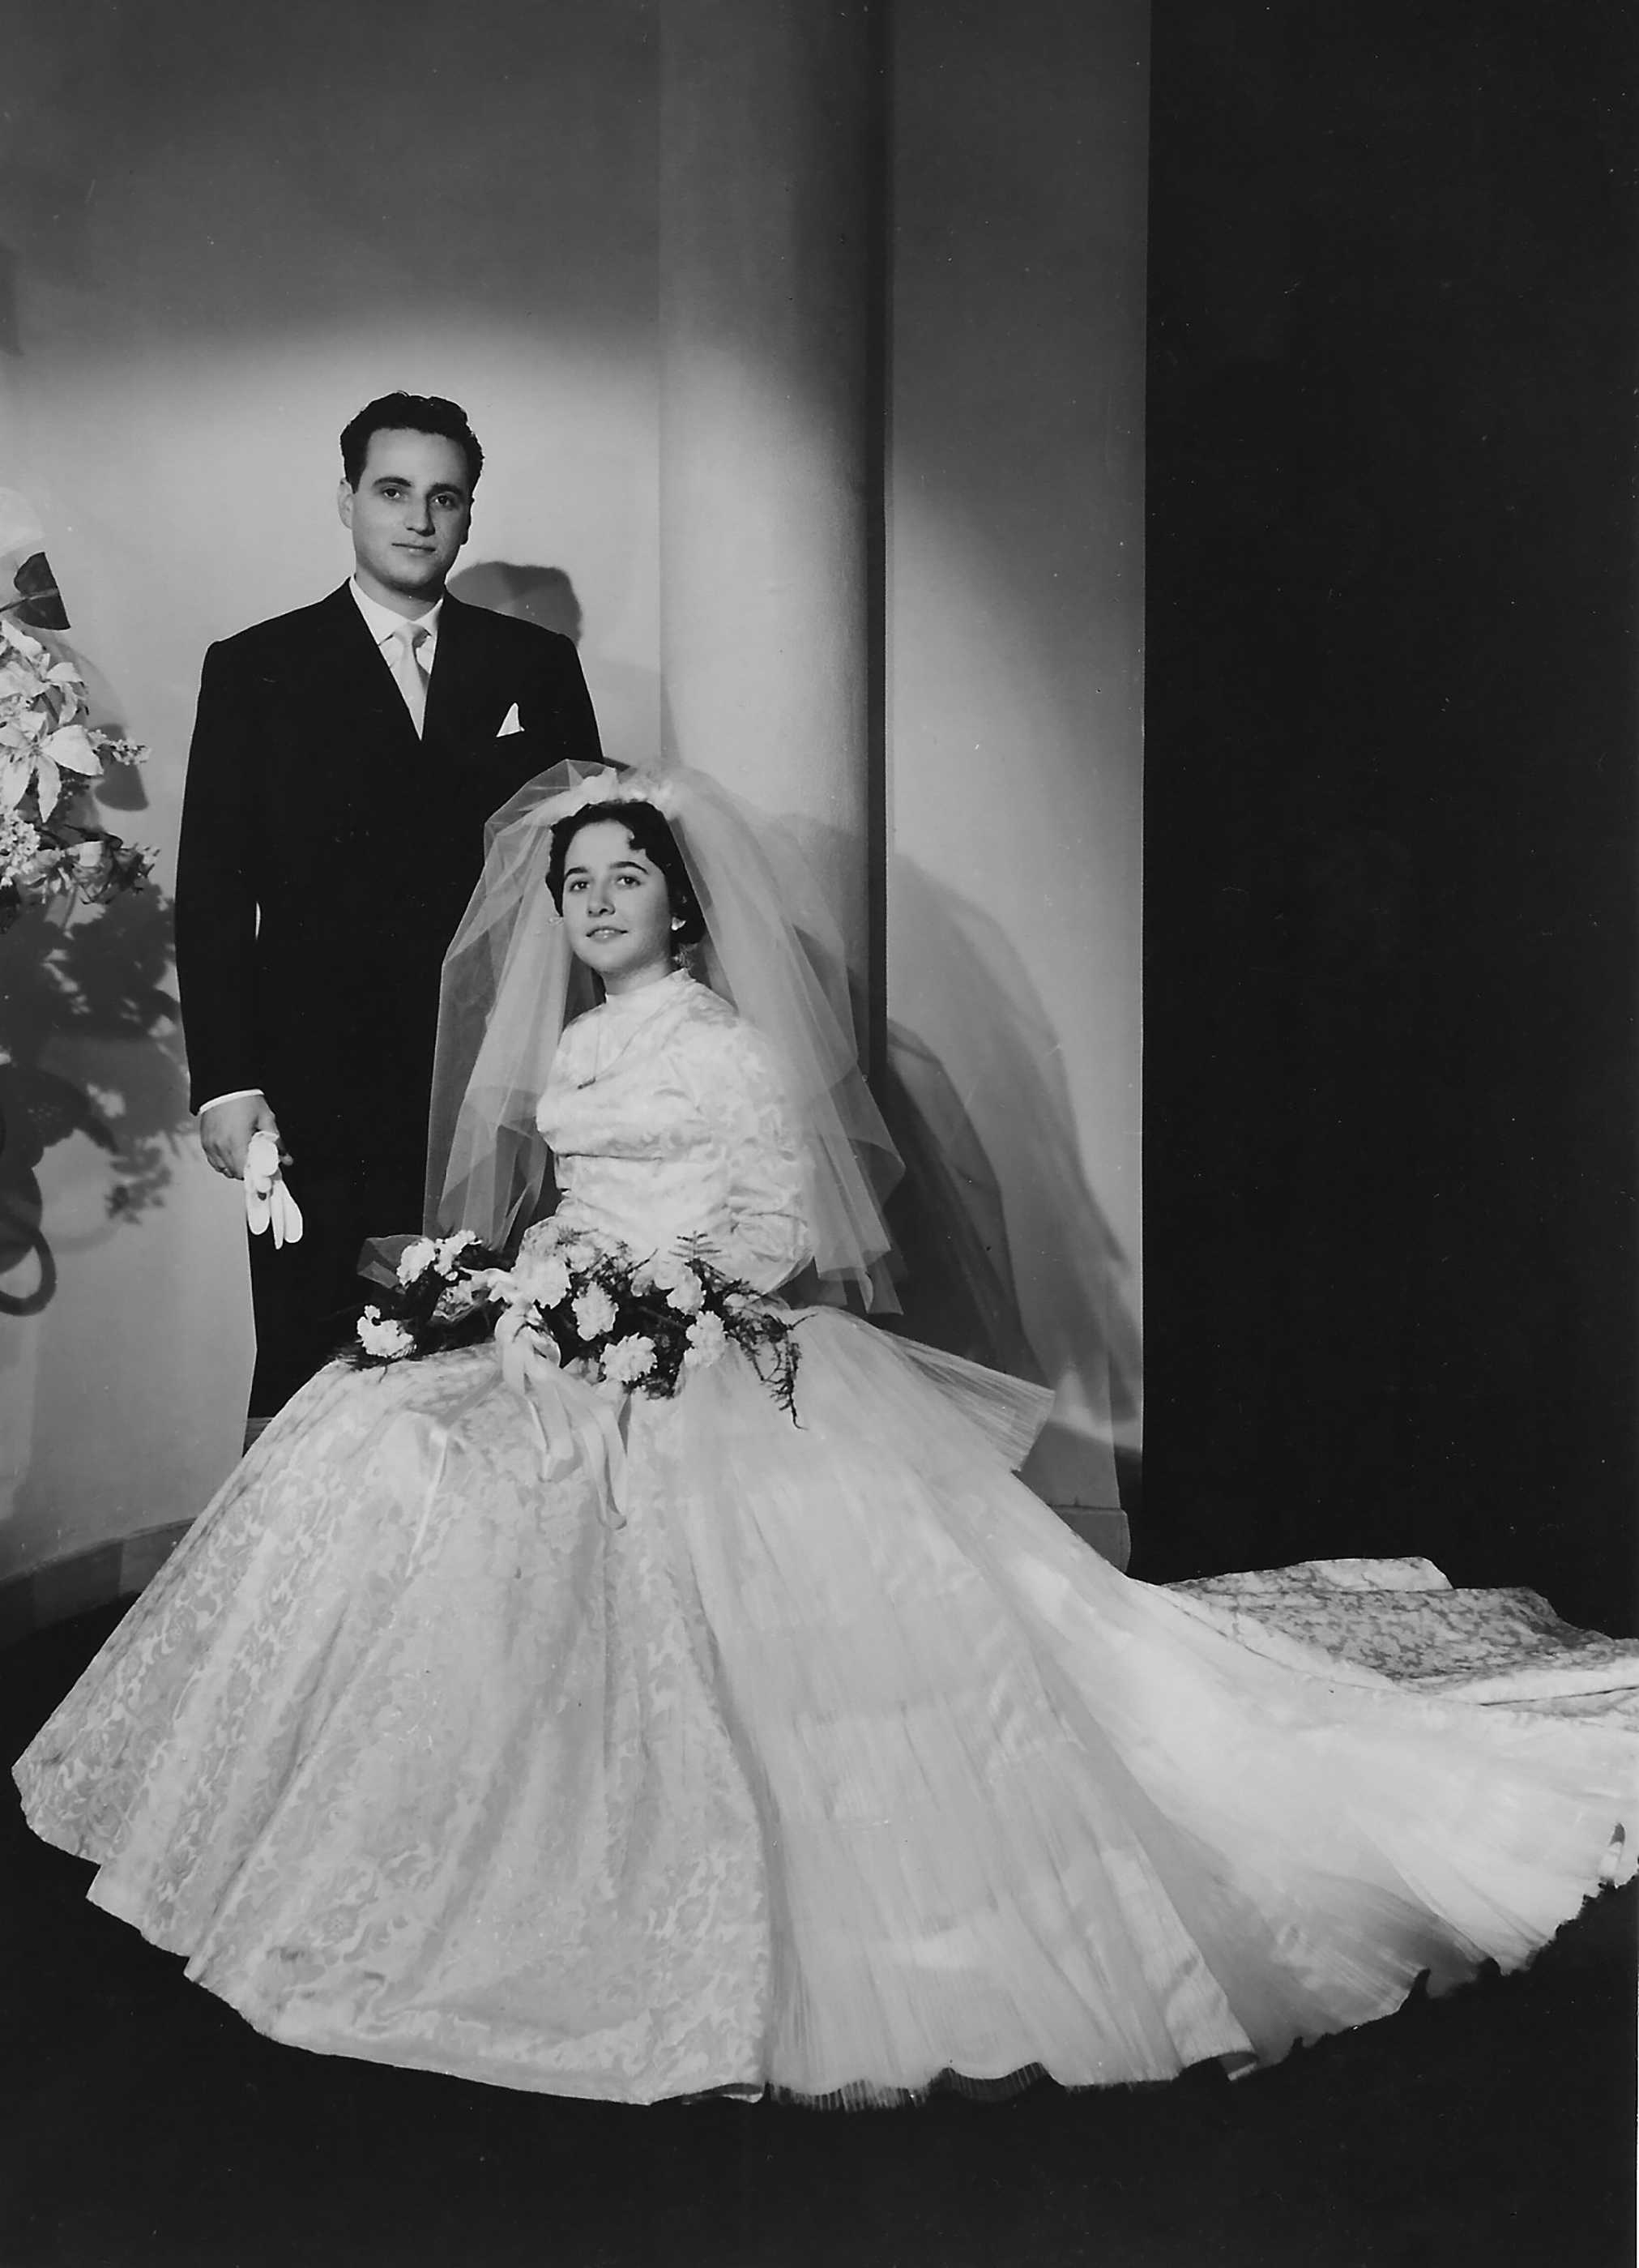 Bride in a full gown with a veil and groom in a suit, both posing for a classic wedding photo